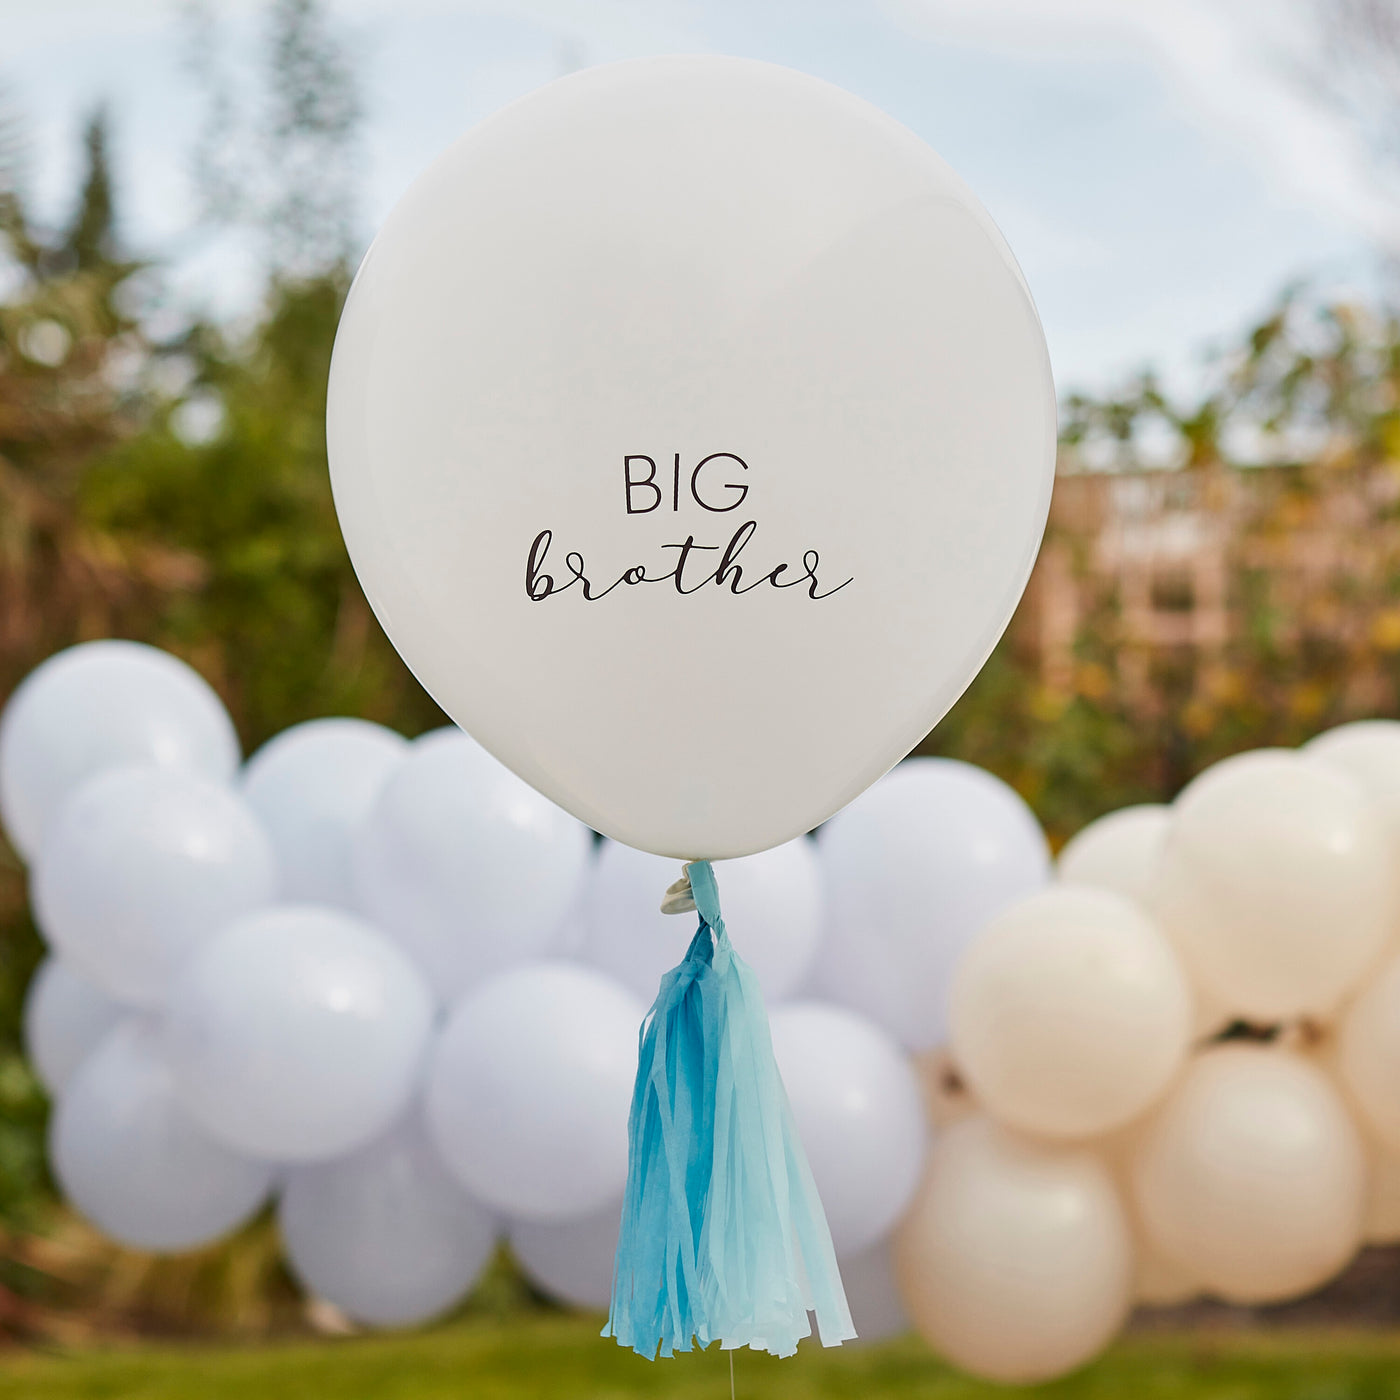 Ginger Ray Big Brother Balloon with Blue Tassels